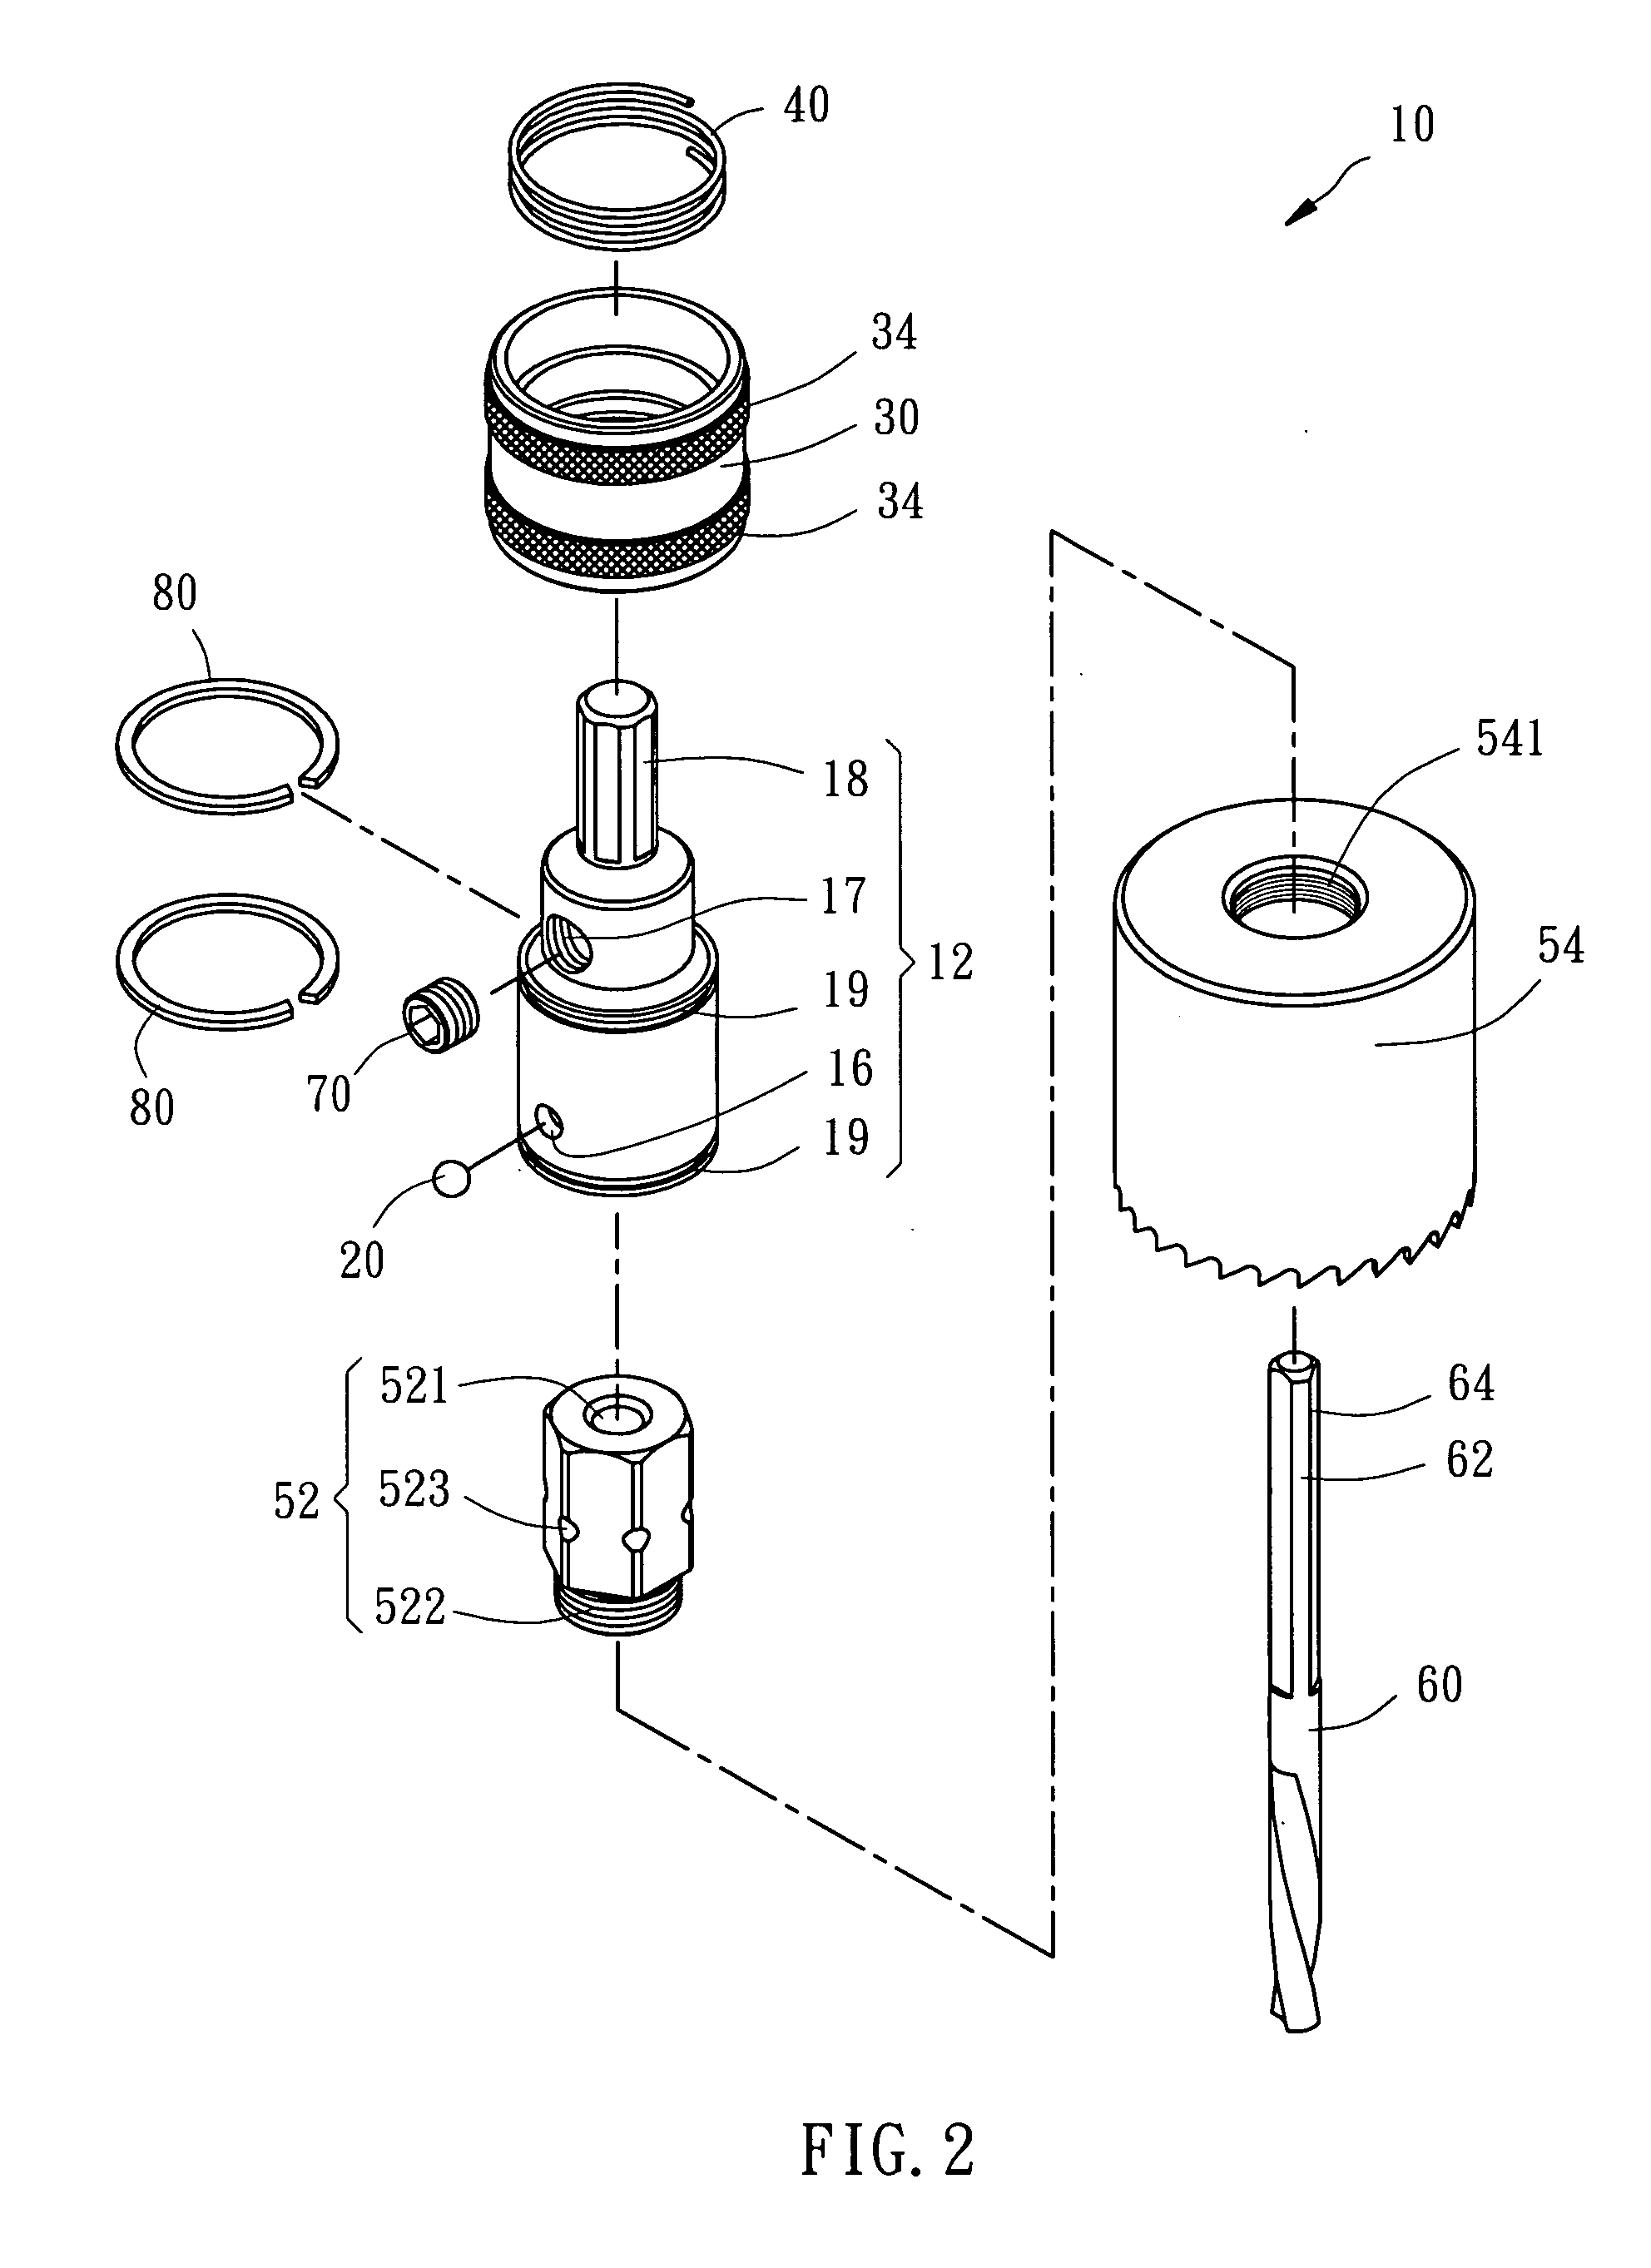 Hole cutter having detachable hole-sawing blade